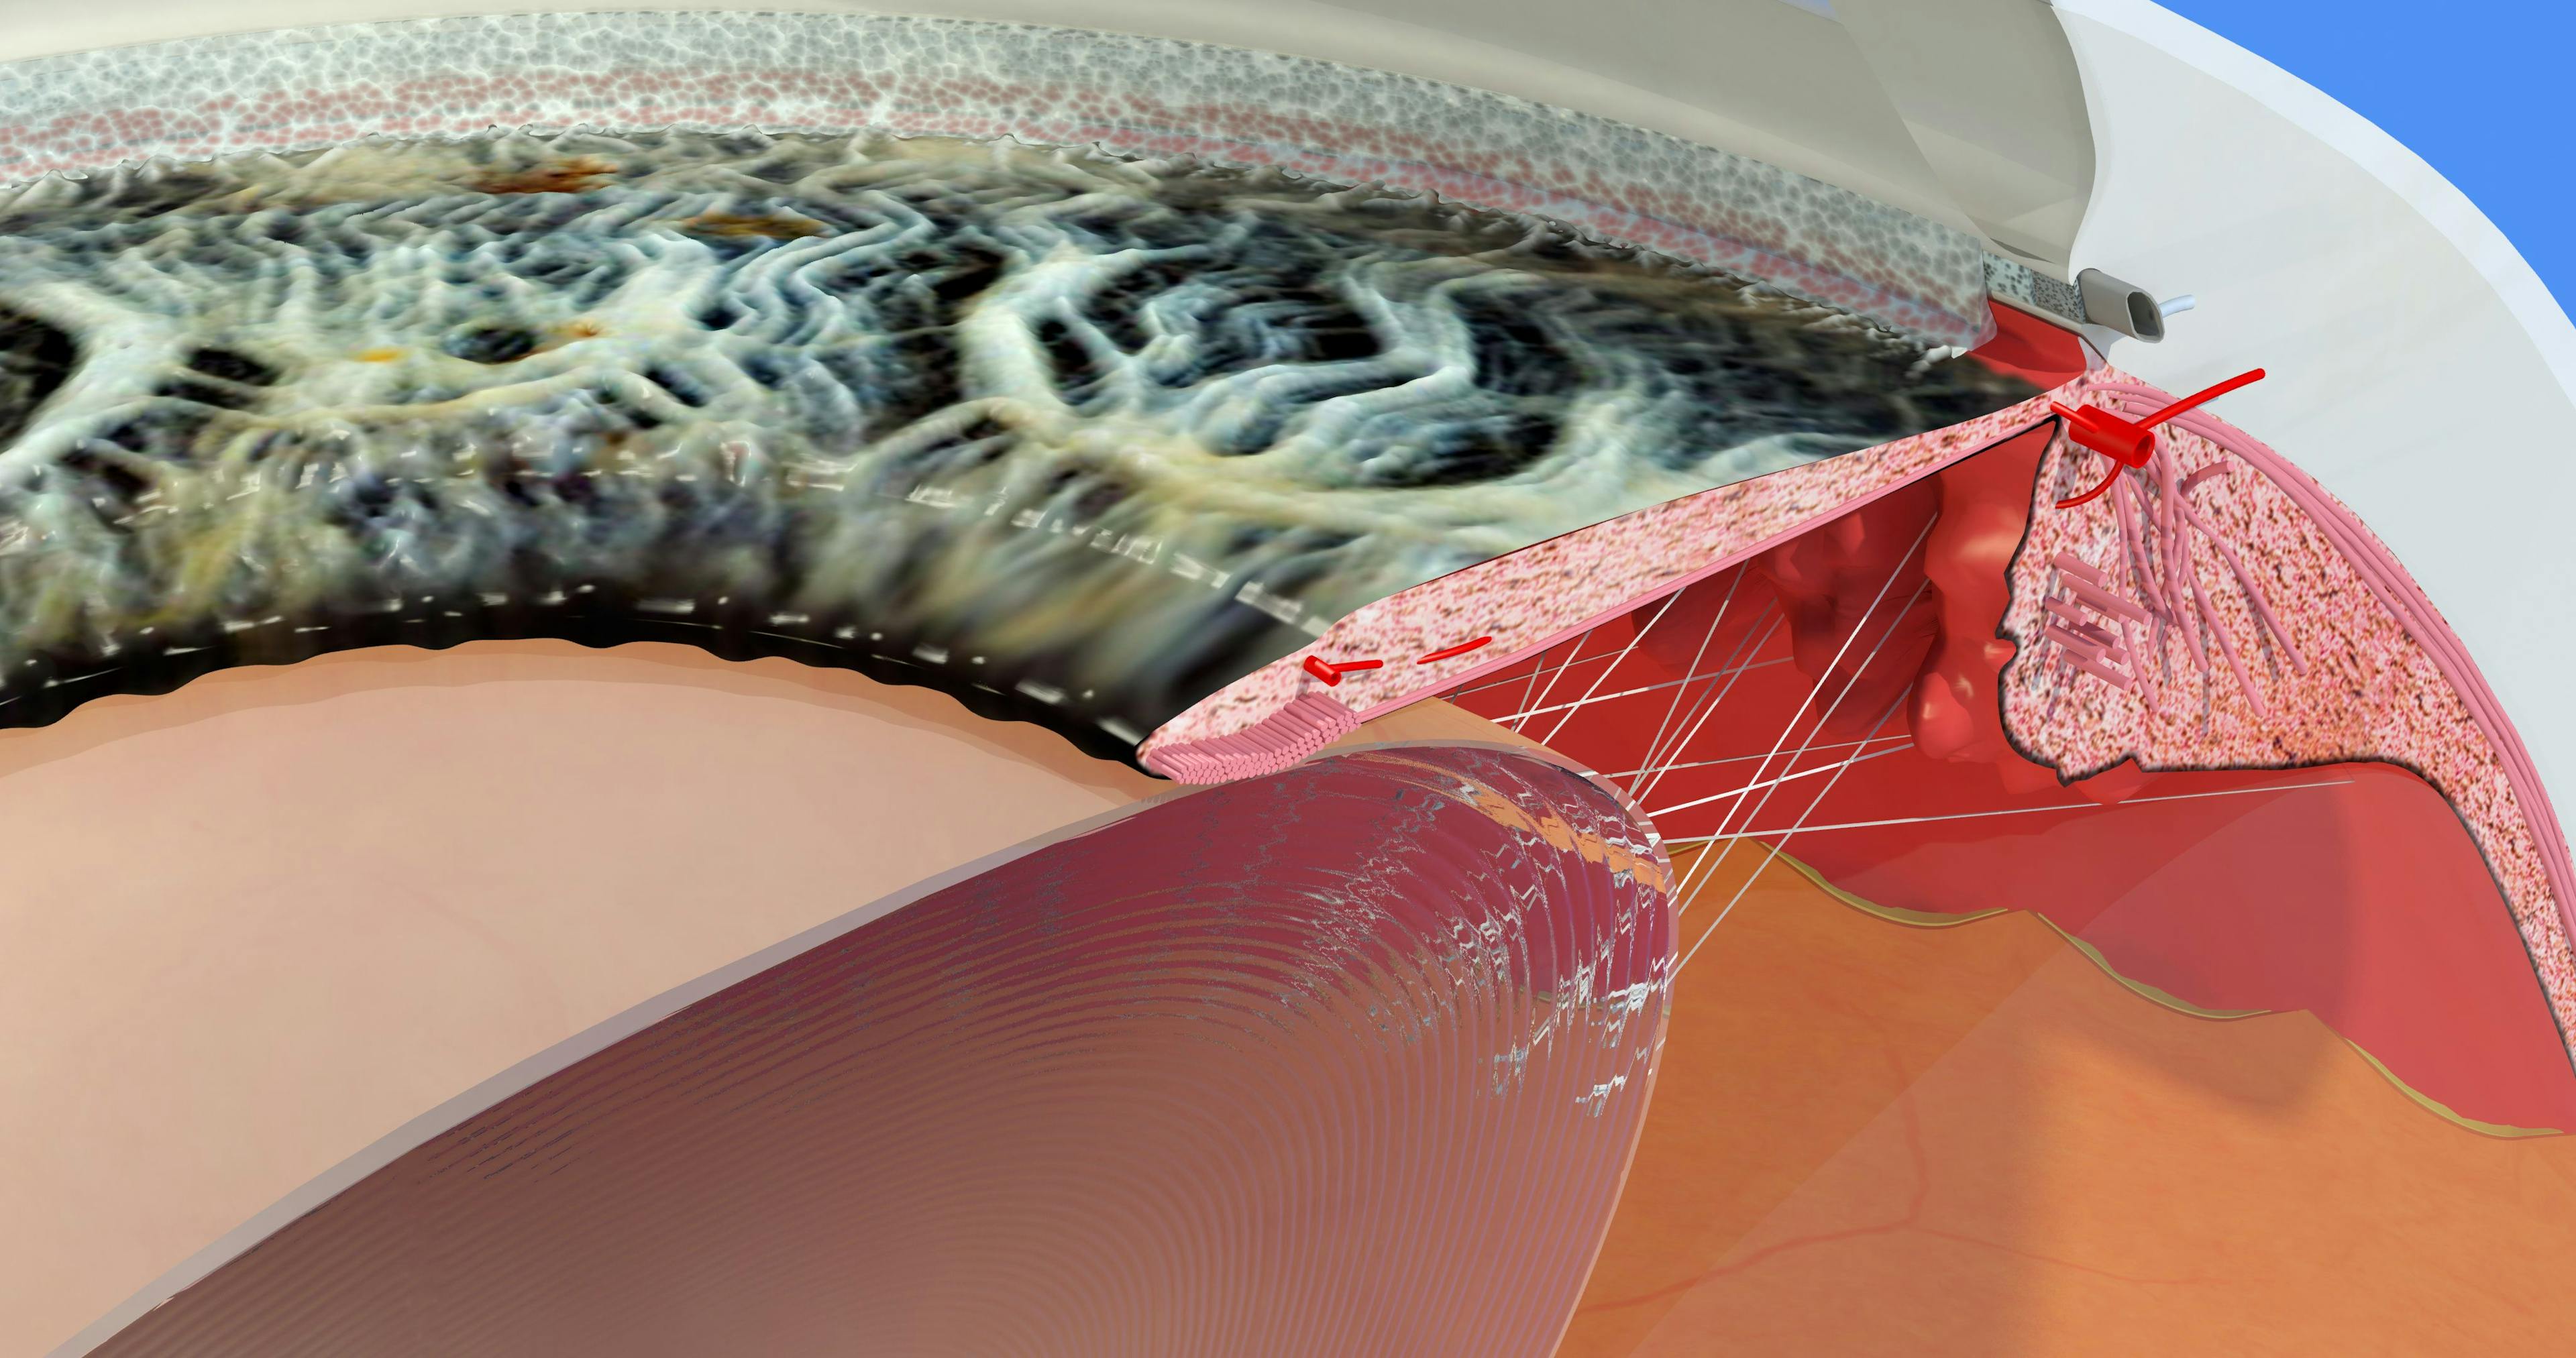 Understanding Schlemm canal to improve the results of stent surgery